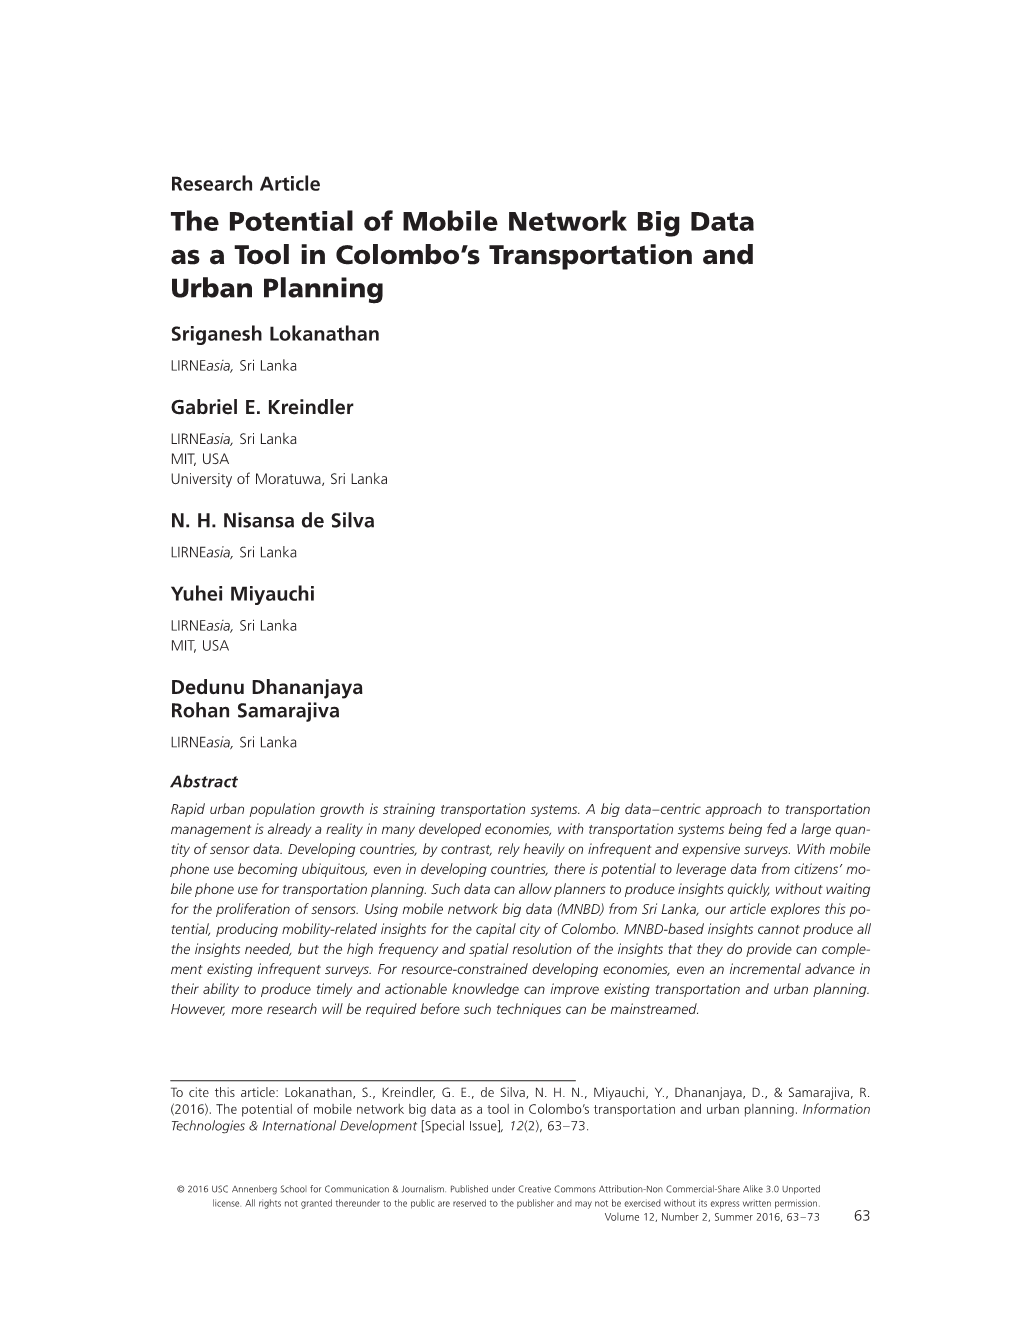 The Potential of Mobile Network Big Data As a Tool in Colombo's